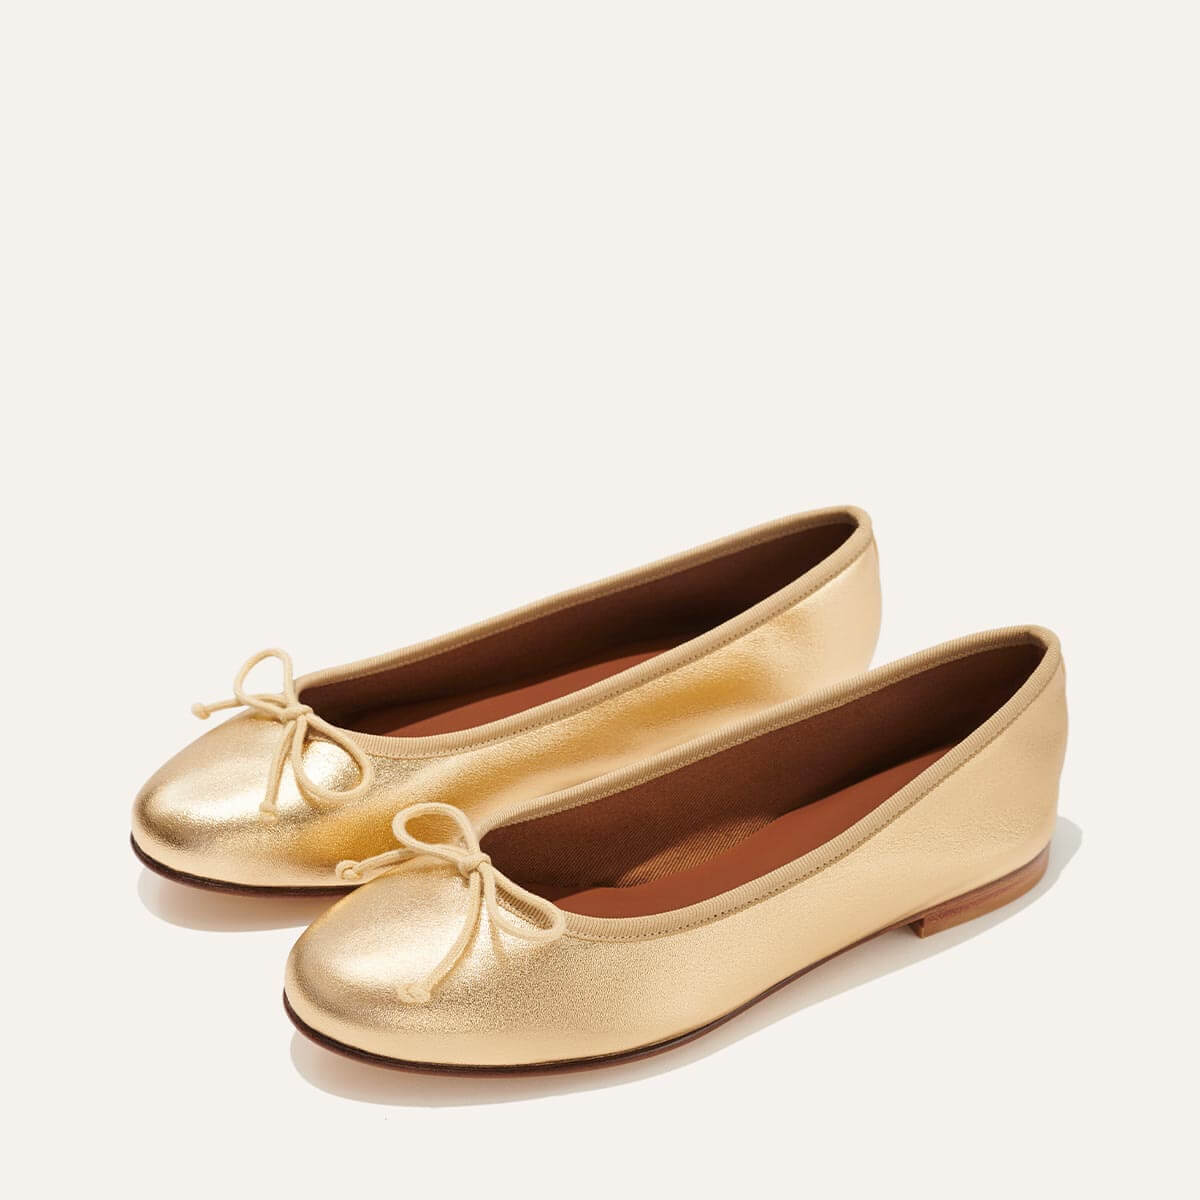 Margaux's classic and comfortable Demi ballet flat, made in a soft, gold Italian nappa leather 